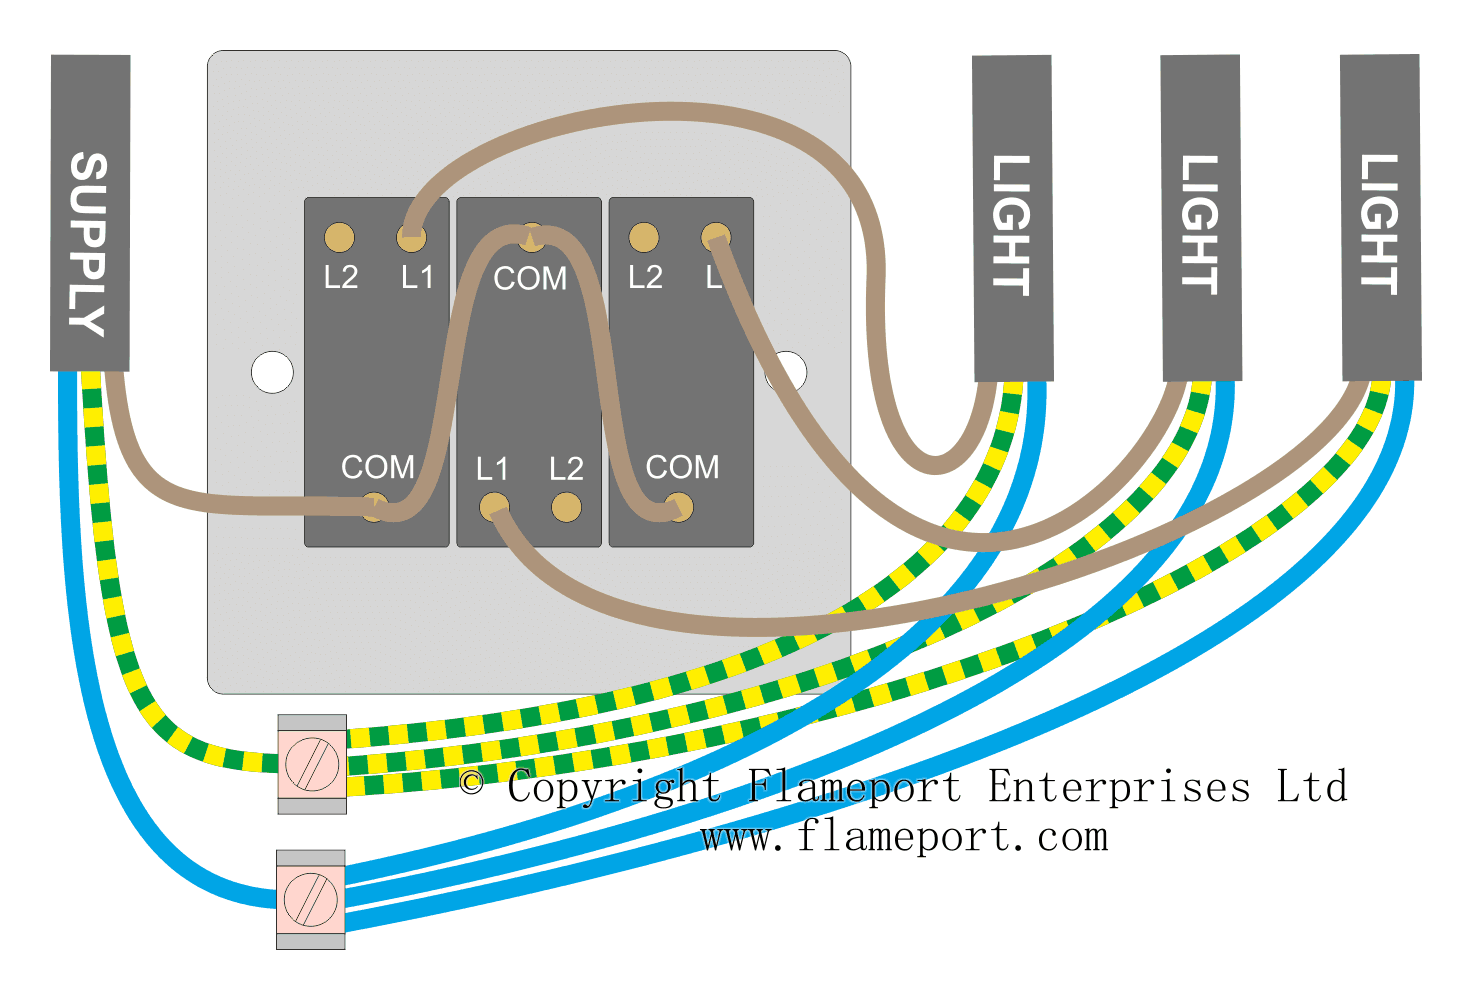 Wiring Diagram For A Light Switch from www.flameport.com